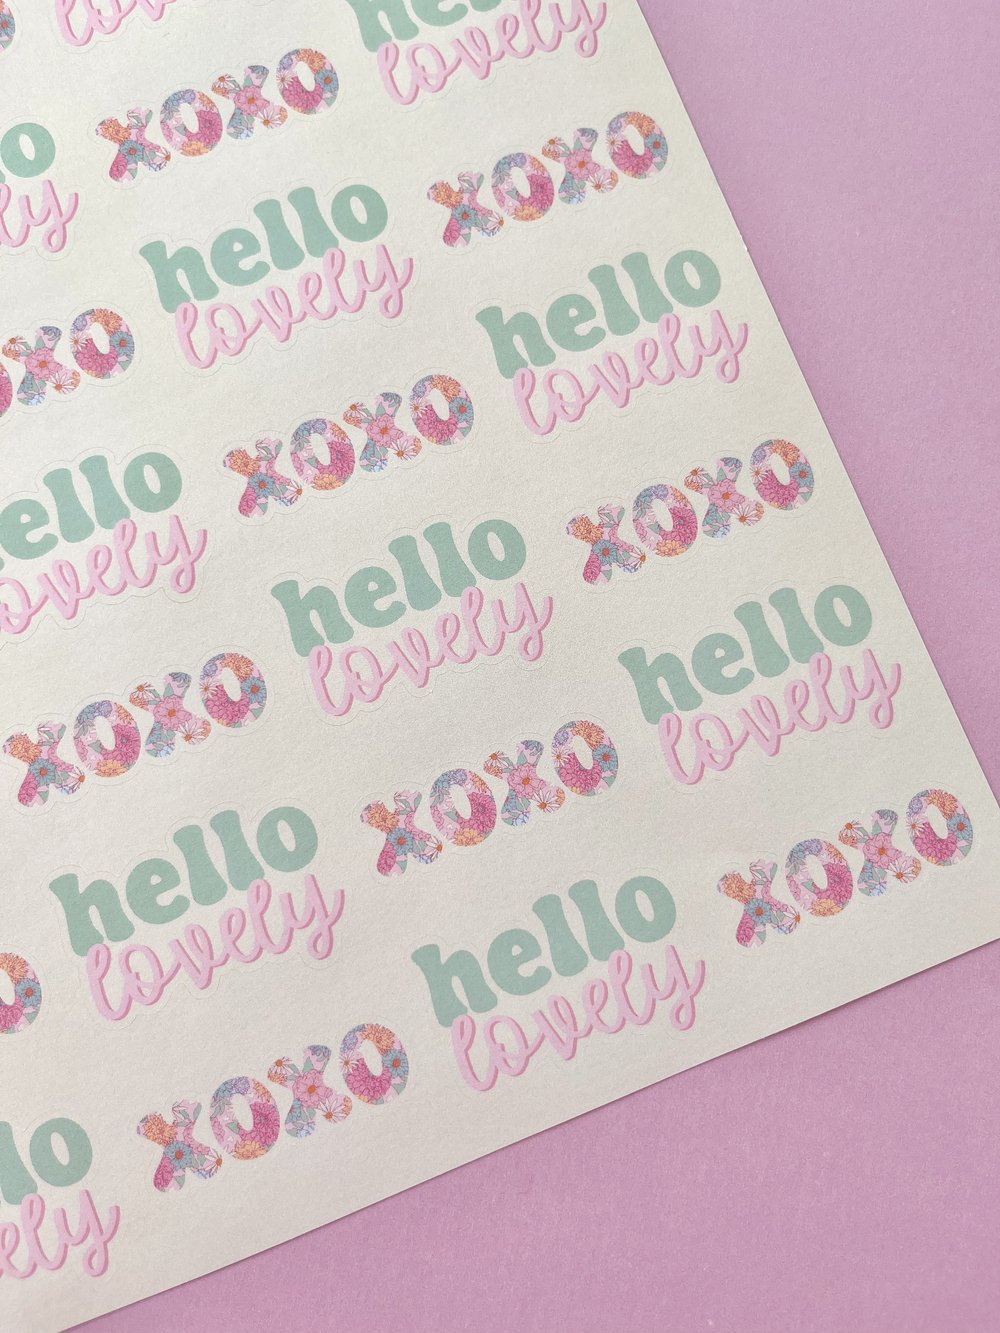 Make Your Shipments Pop with Our Colorful and Creative Washi Tape —  Shipping Hip Printed Poly Mailers, Insert Cards, Washi Tape, Sticker Sheets  & more